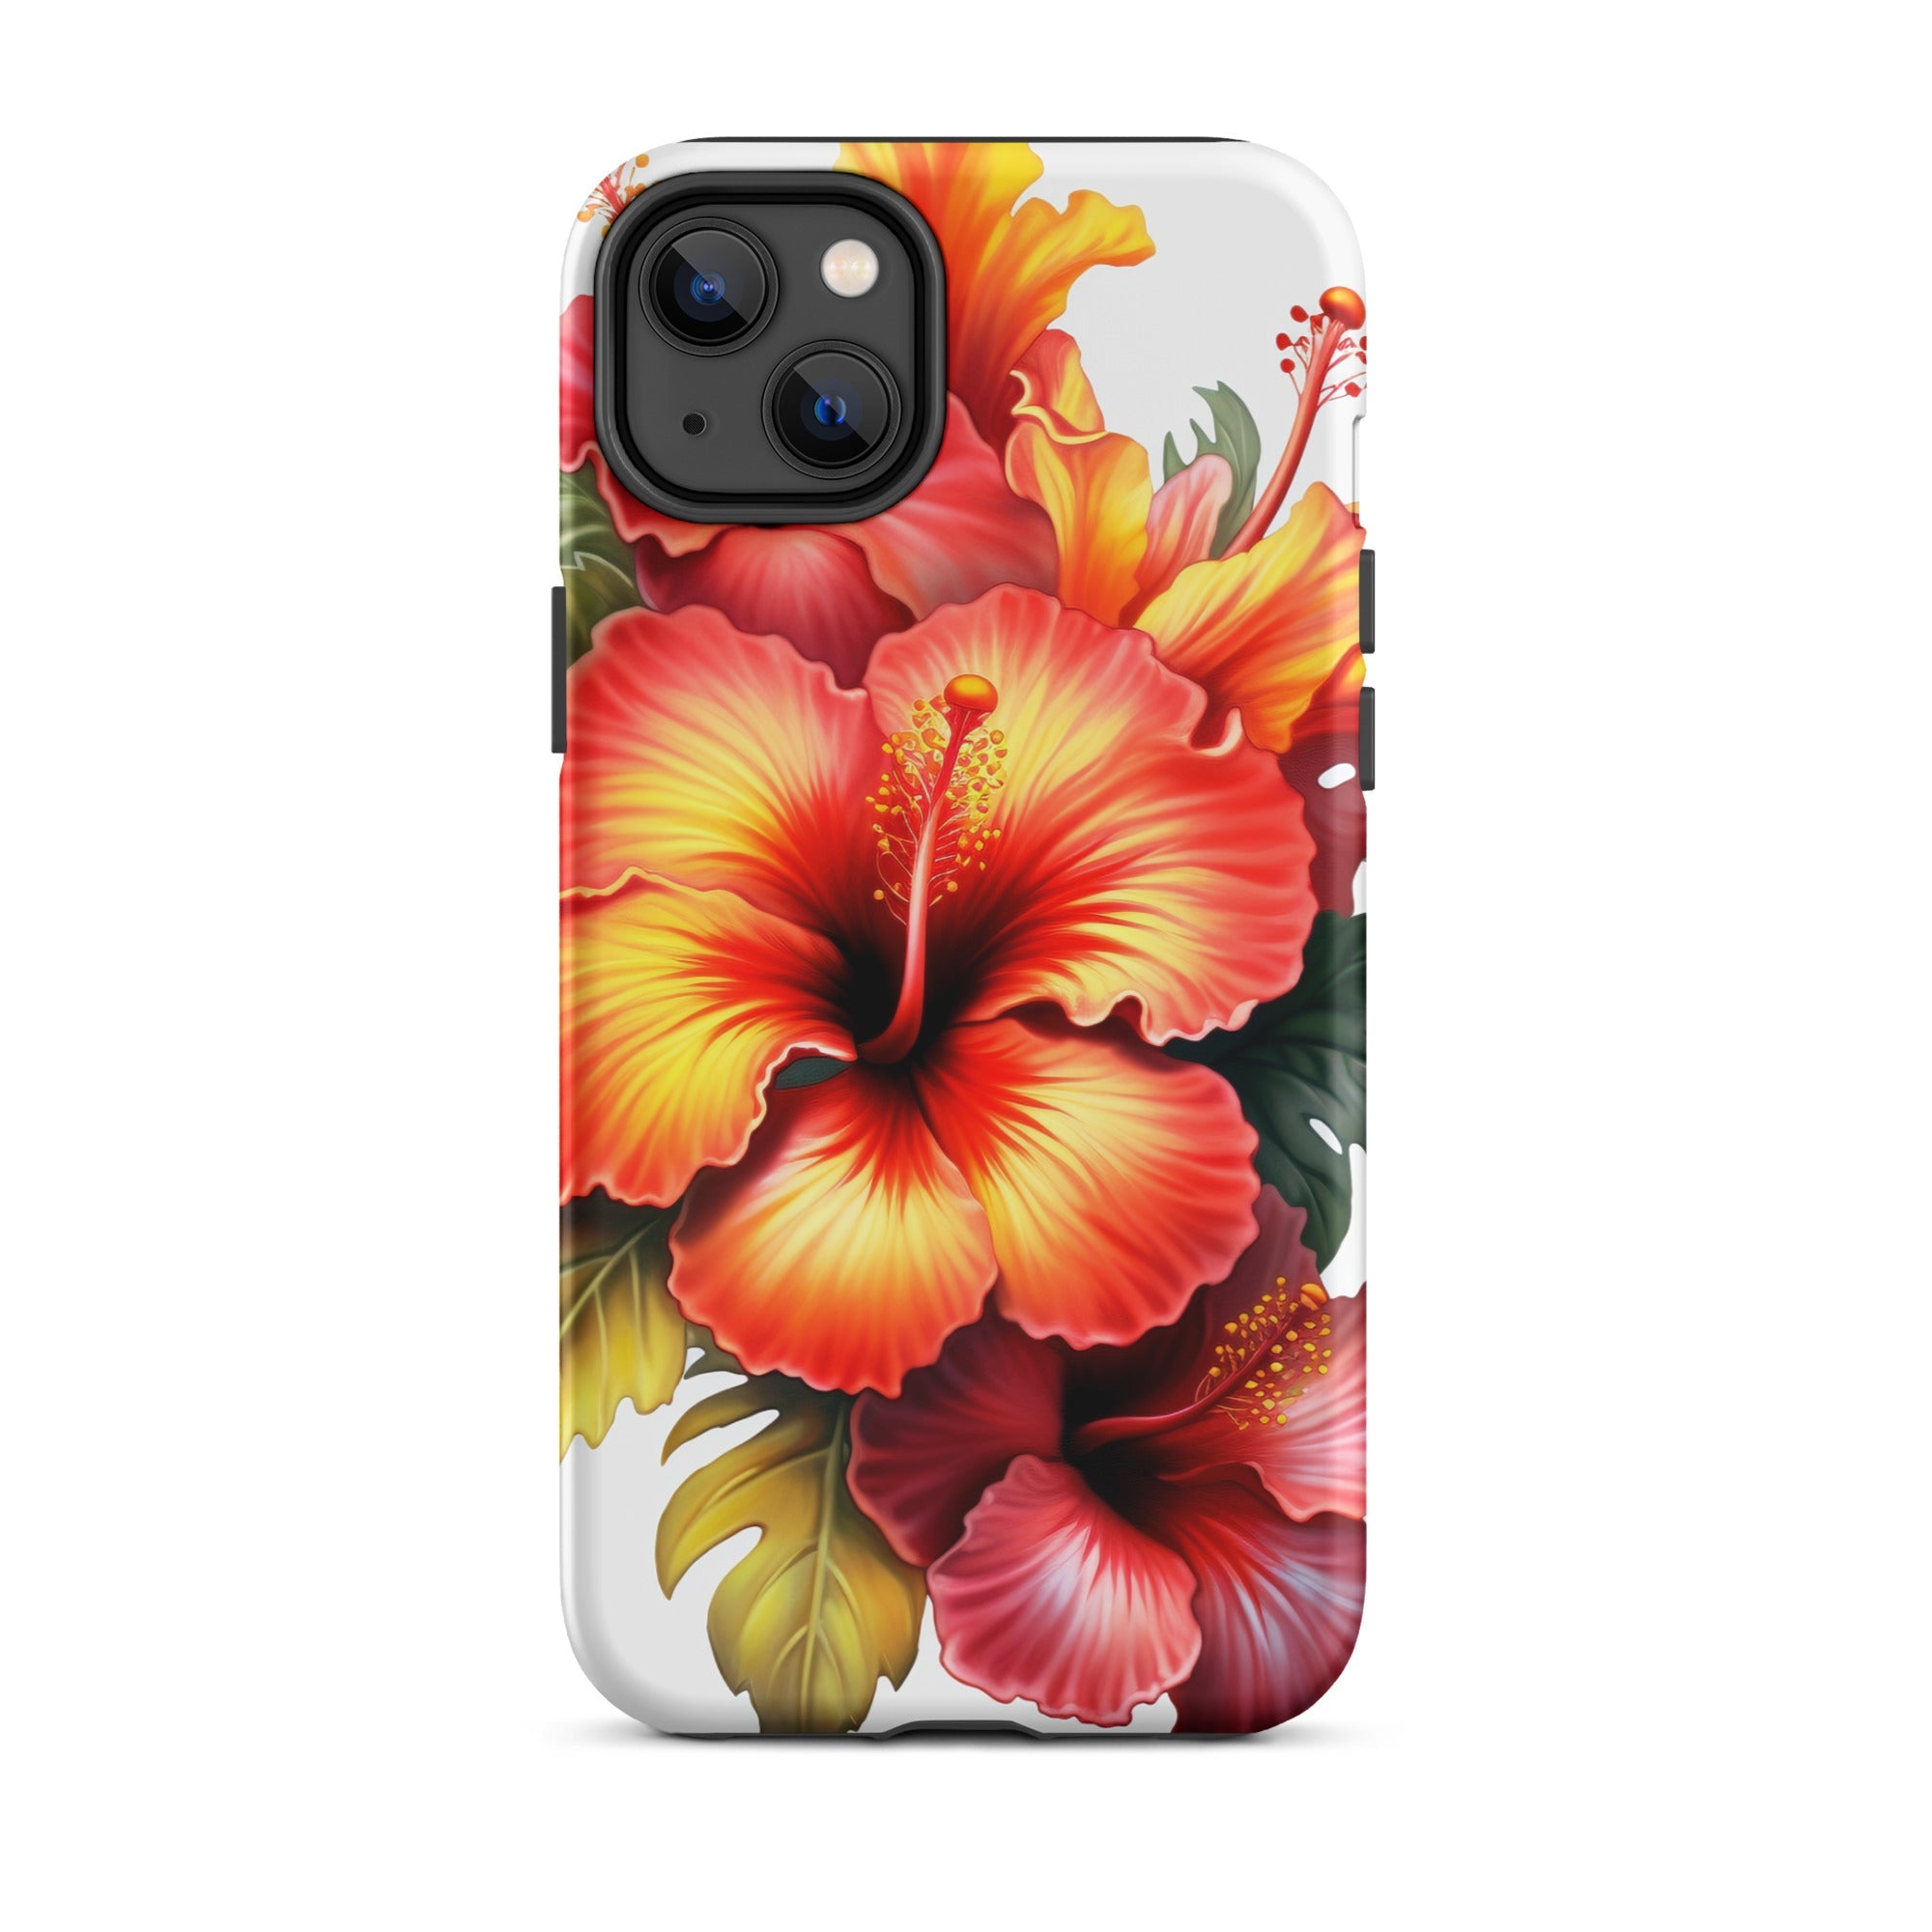 Hibiscus Flower iPhone Case by Visual Verse - Image 26